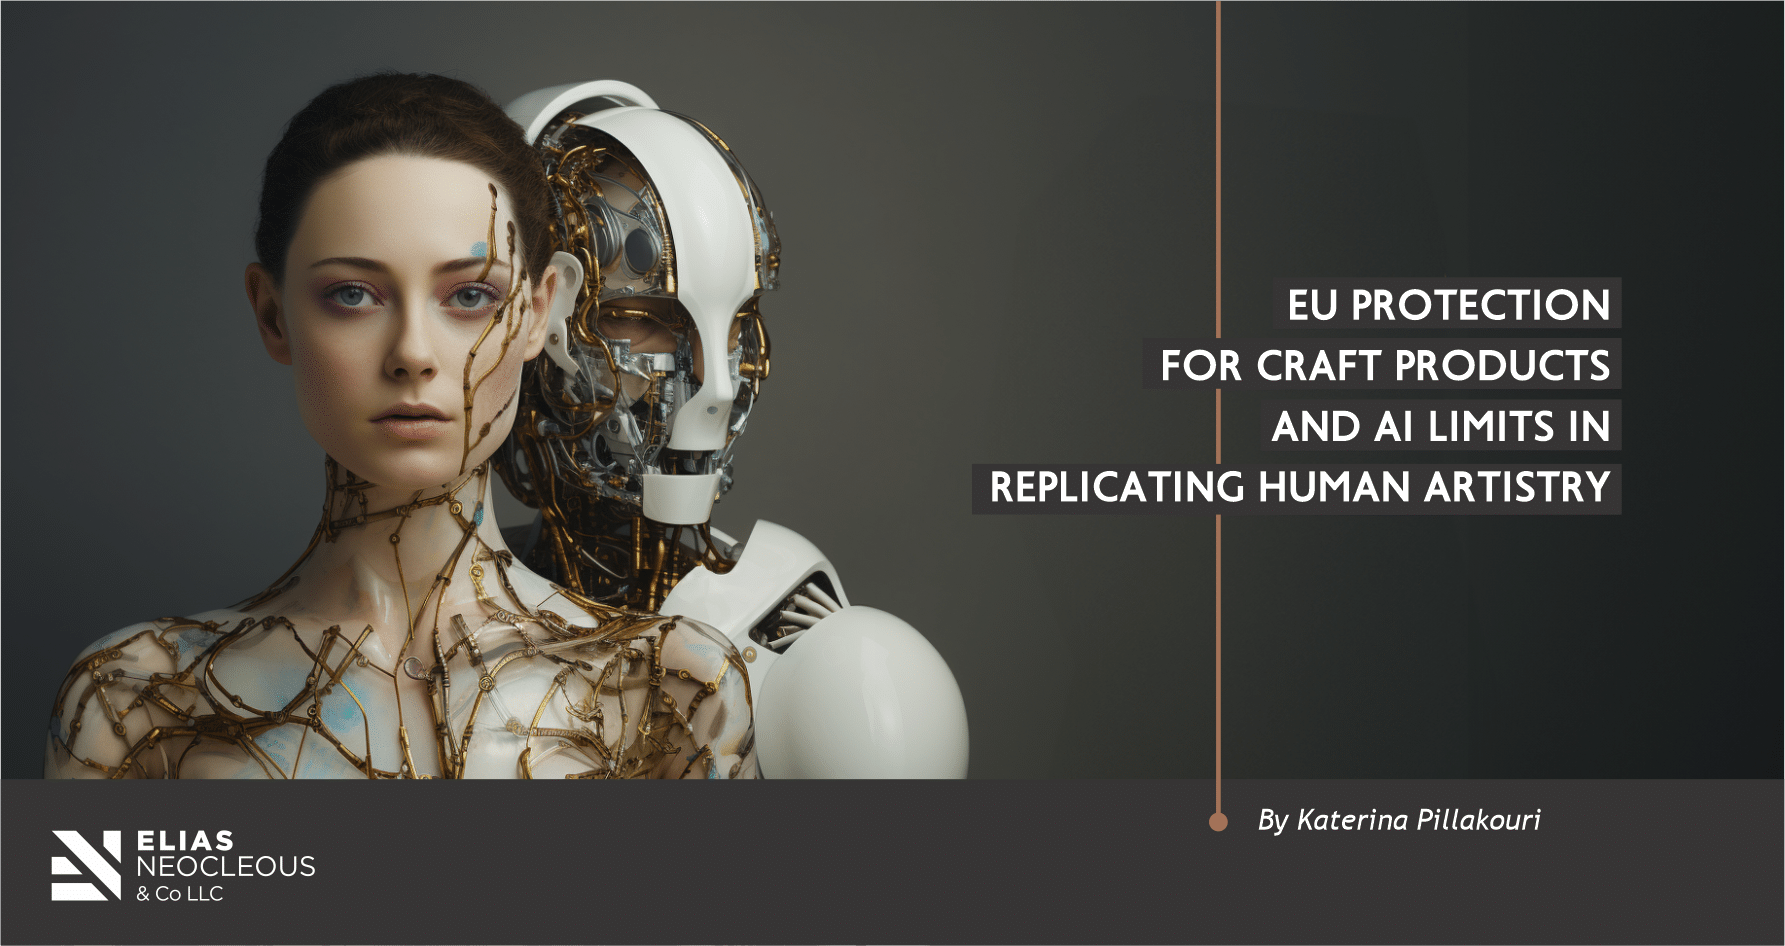 EU protection for craft products and AI limits in replicating human artistry